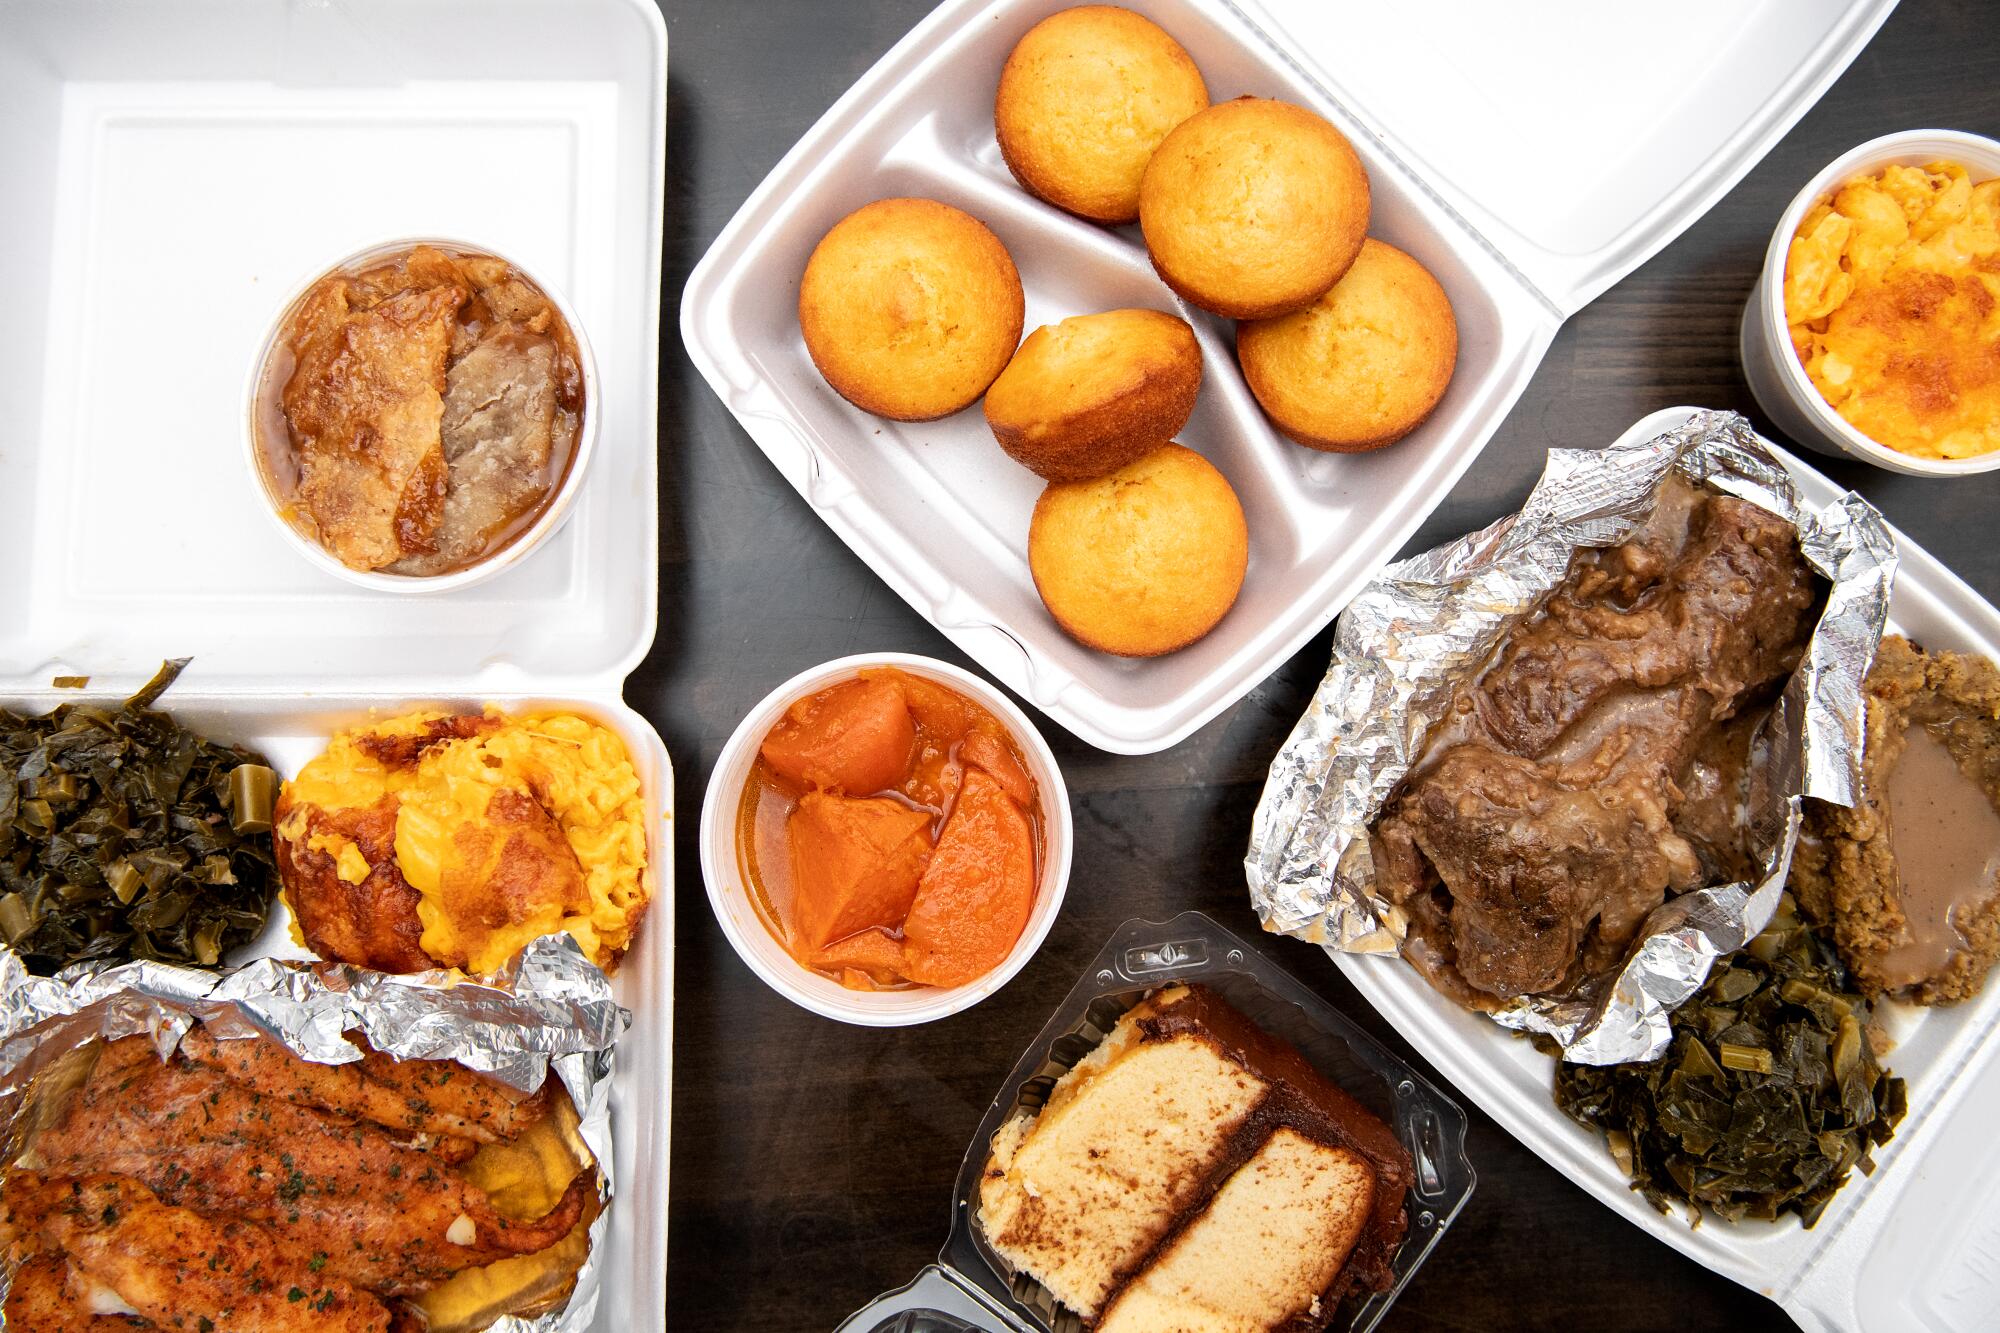 A spread from Dulan's includes corn muffins, yams, short rib and more.